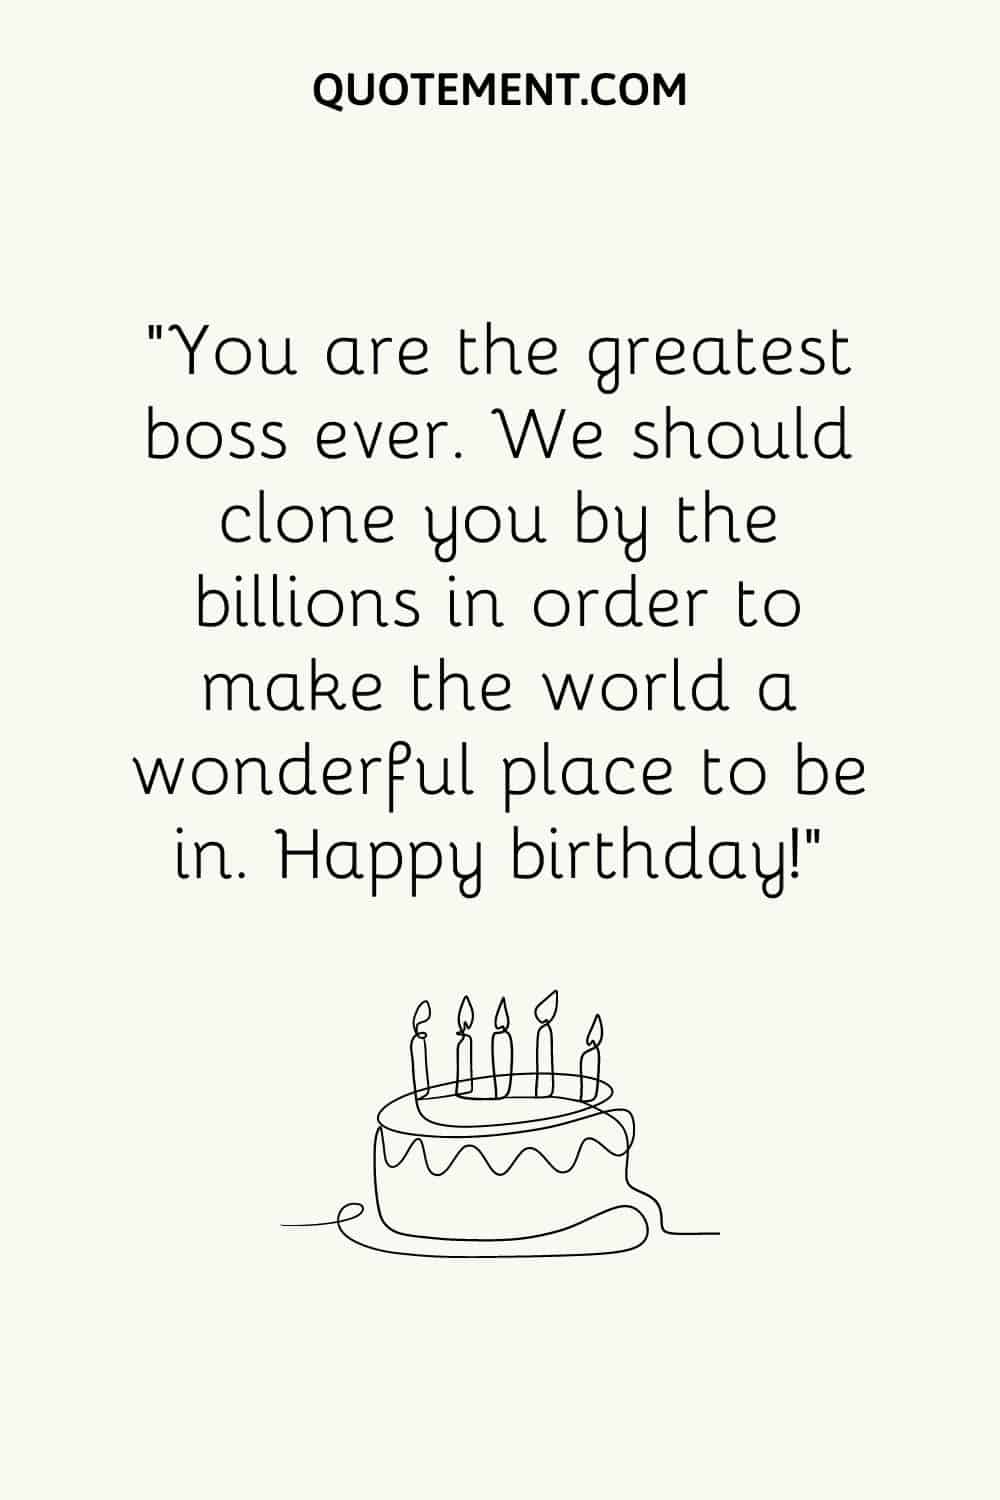 You are the greatest boss ever